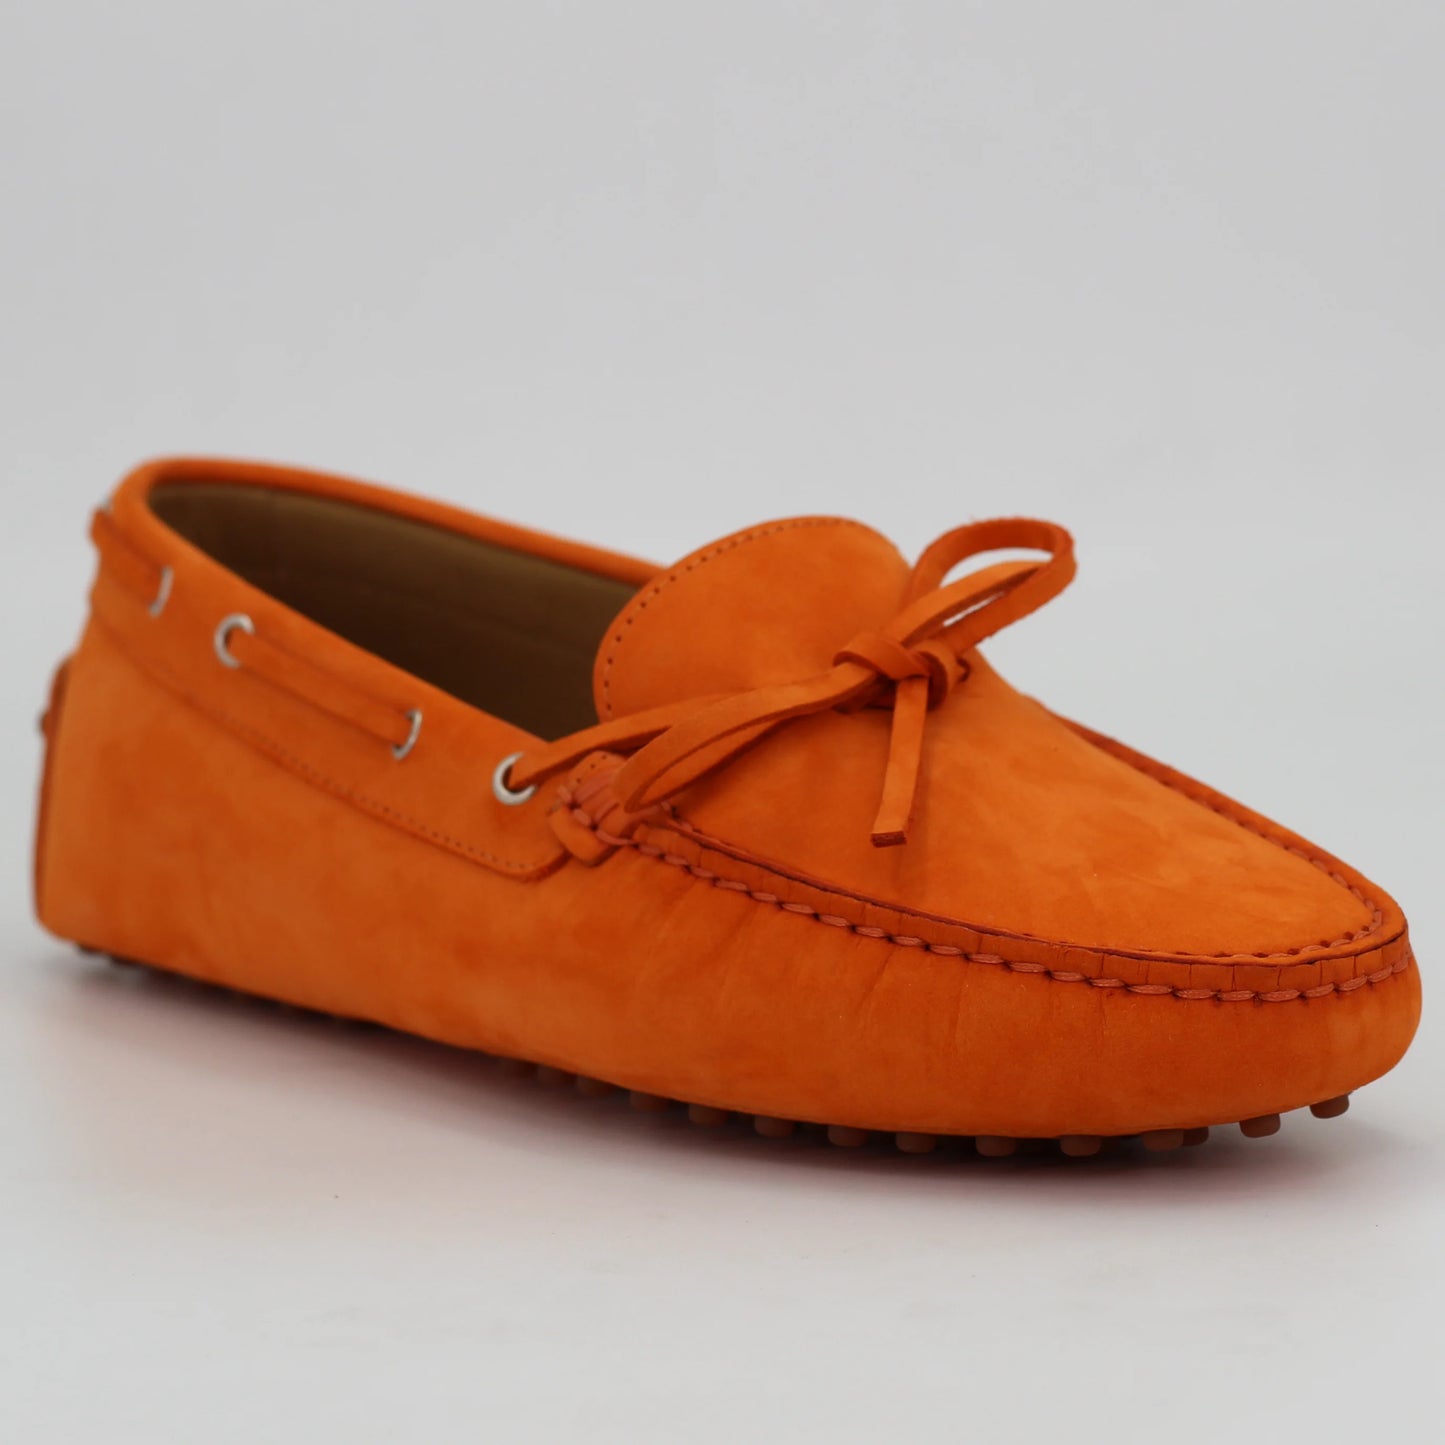 Shop Handmade Italian Leather moccasin in orange (COND04011) or browse our range of hand-made Italian shoes in leather or suede in-store at Aliverti Cape Town, or shop online. We deliver in South Africa & offer multiple payment plans as well as accept multiple safe & secure payment methods.